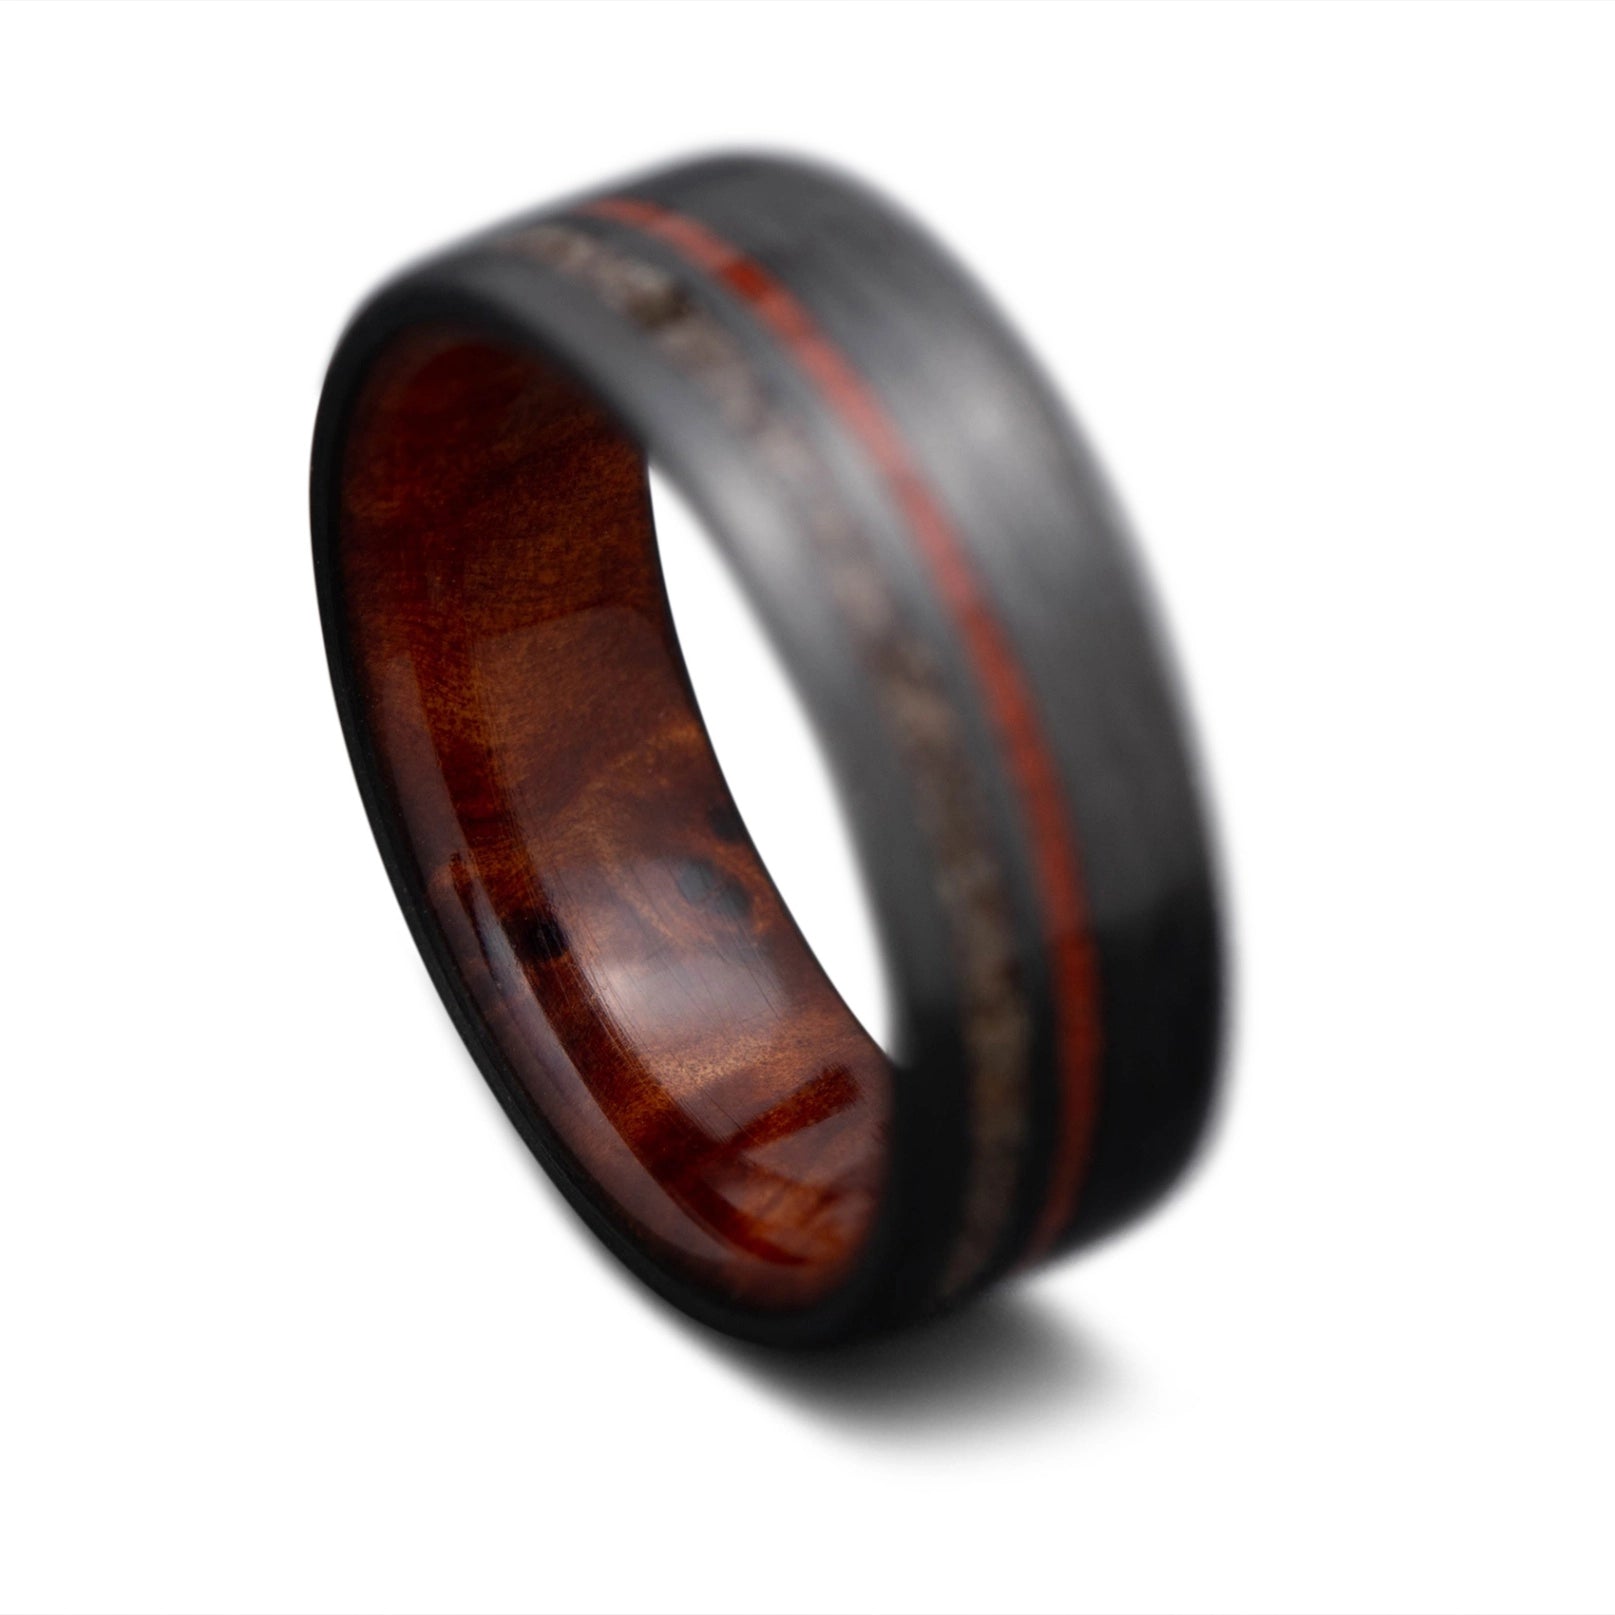 Back of CarbonUni Core Ring with Crushed T-Rex, Red Jasper inlay and Thuya wood inner sleeve, 7mm - THE INNOVATOR